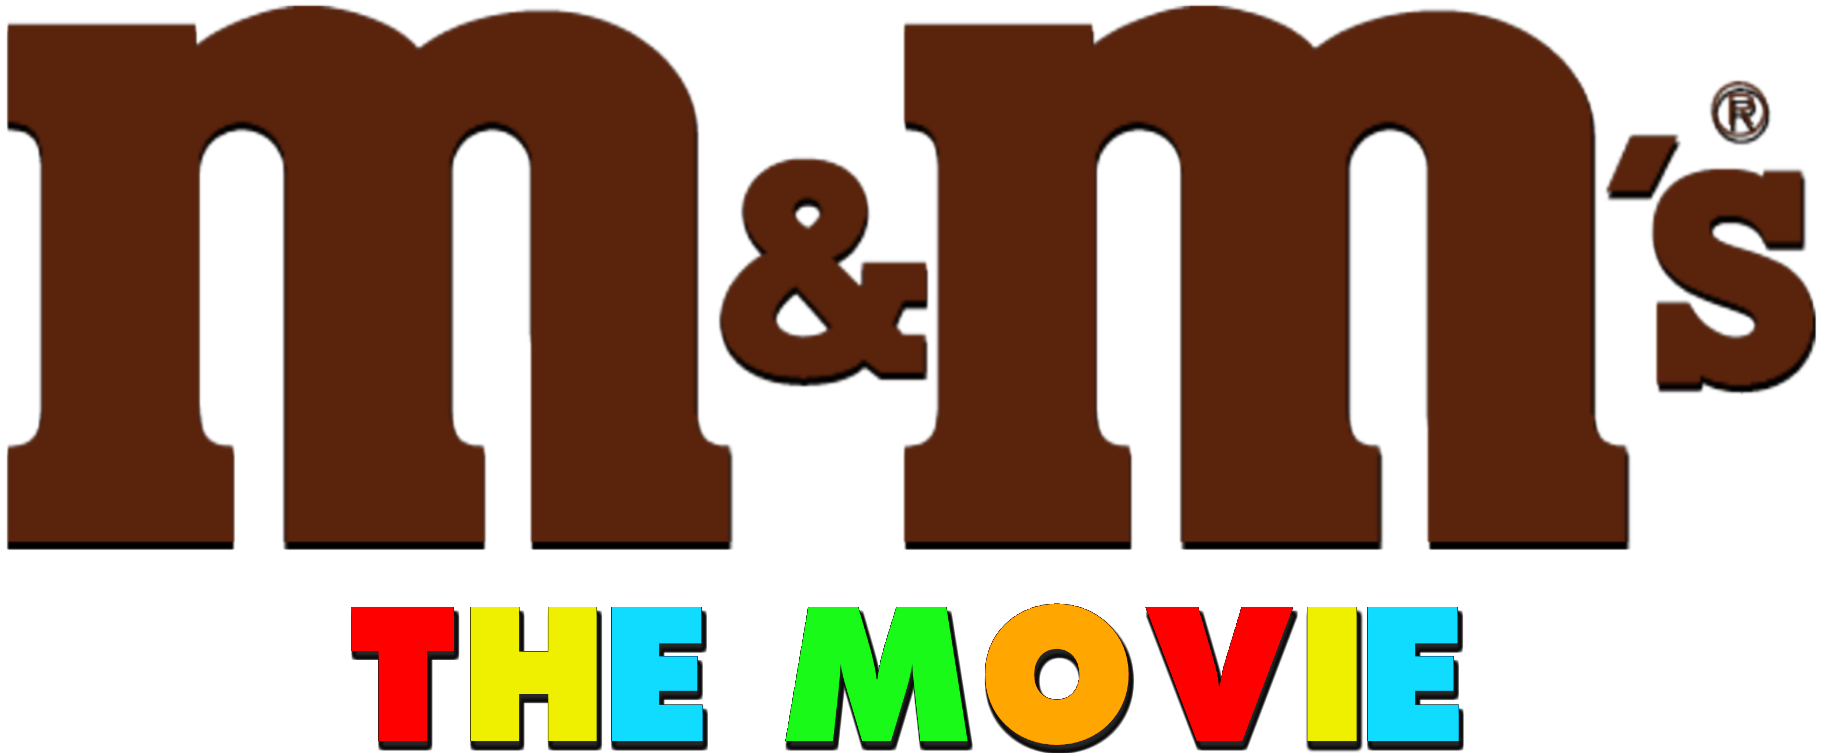 M&M's The Movie, Fantemation Wiki